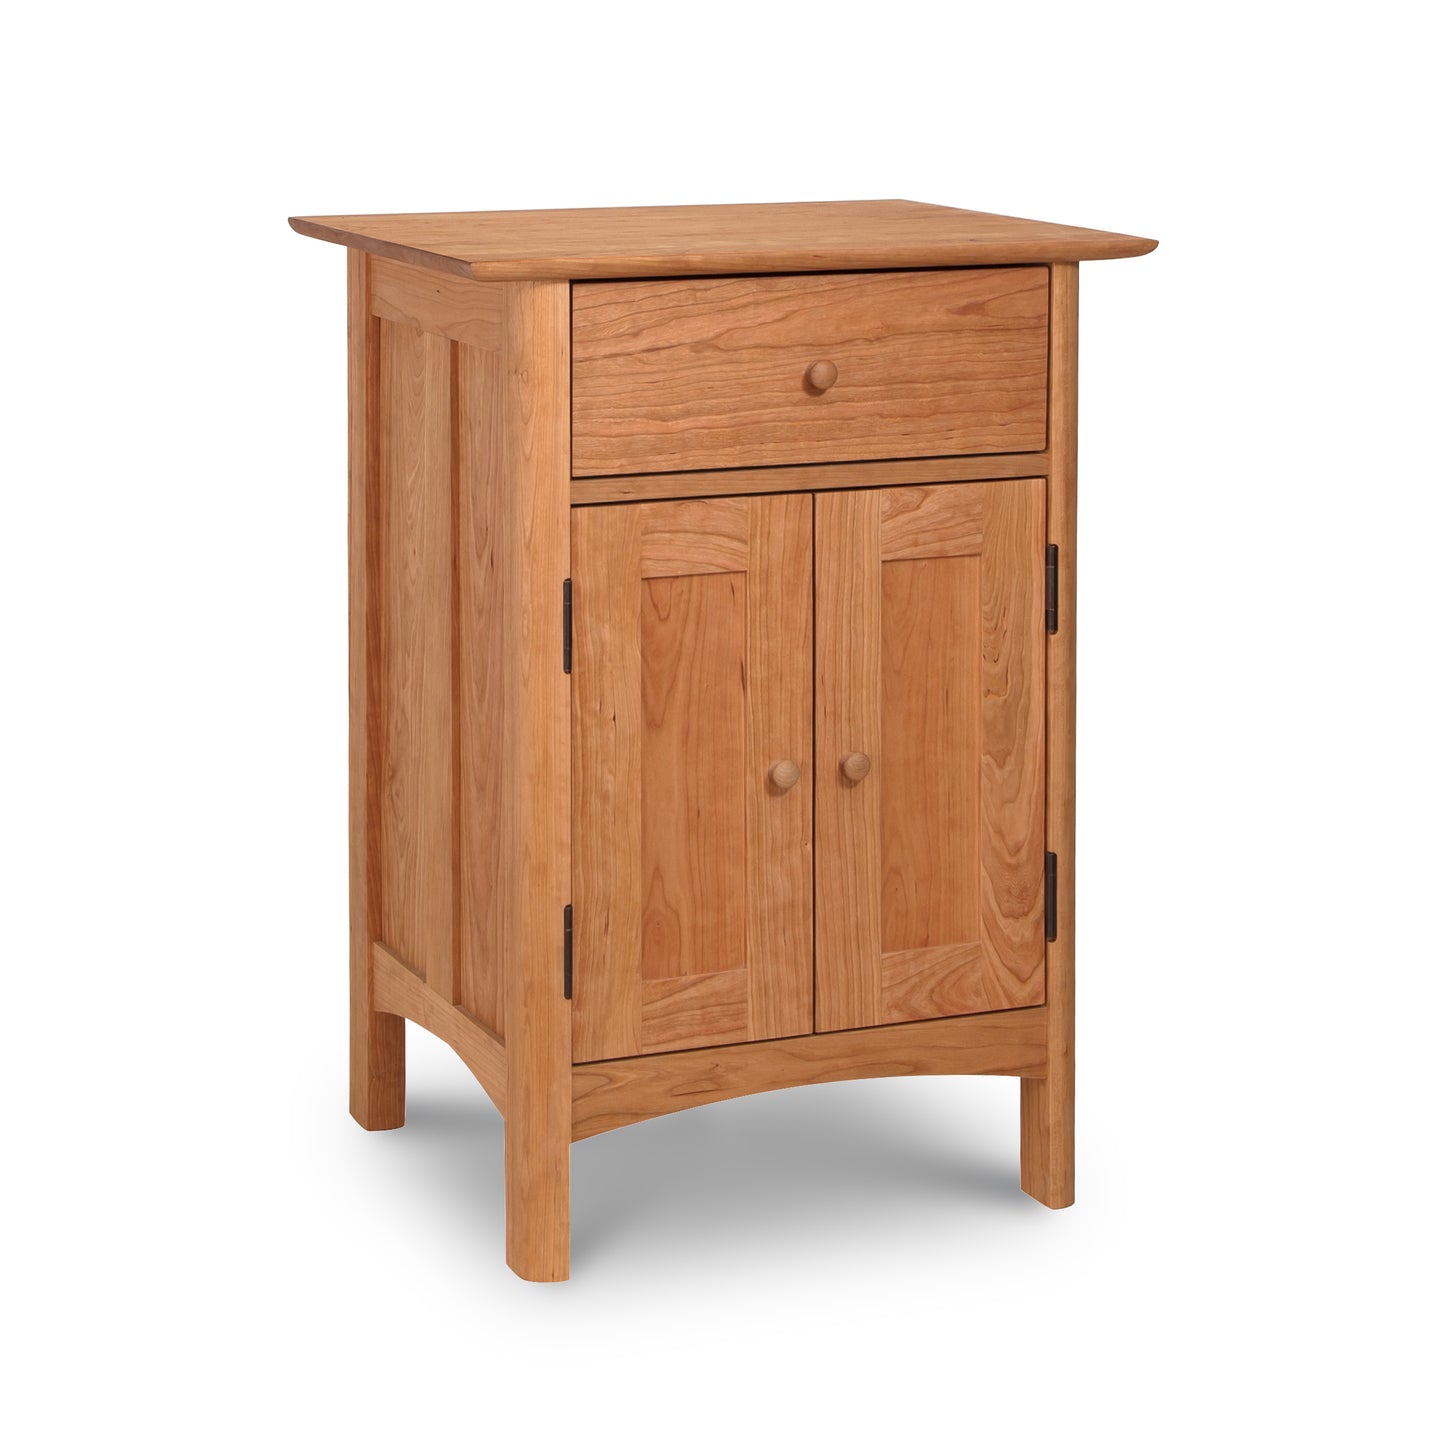 A luxury wooden Vermont Furniture Designs Heartwood Shaker Short Storage Chest with two drawers and a door, offering ample storage space like a storage chest.